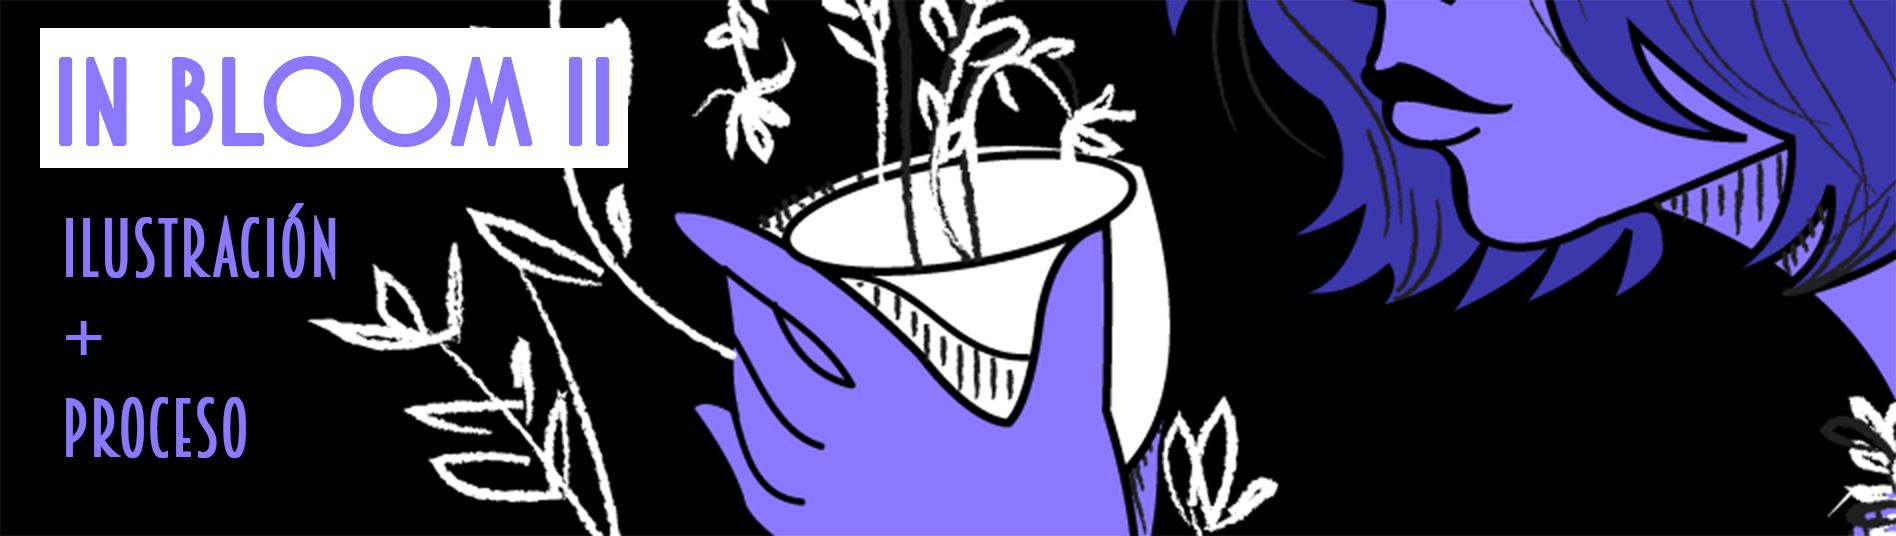 in bloom banner.png